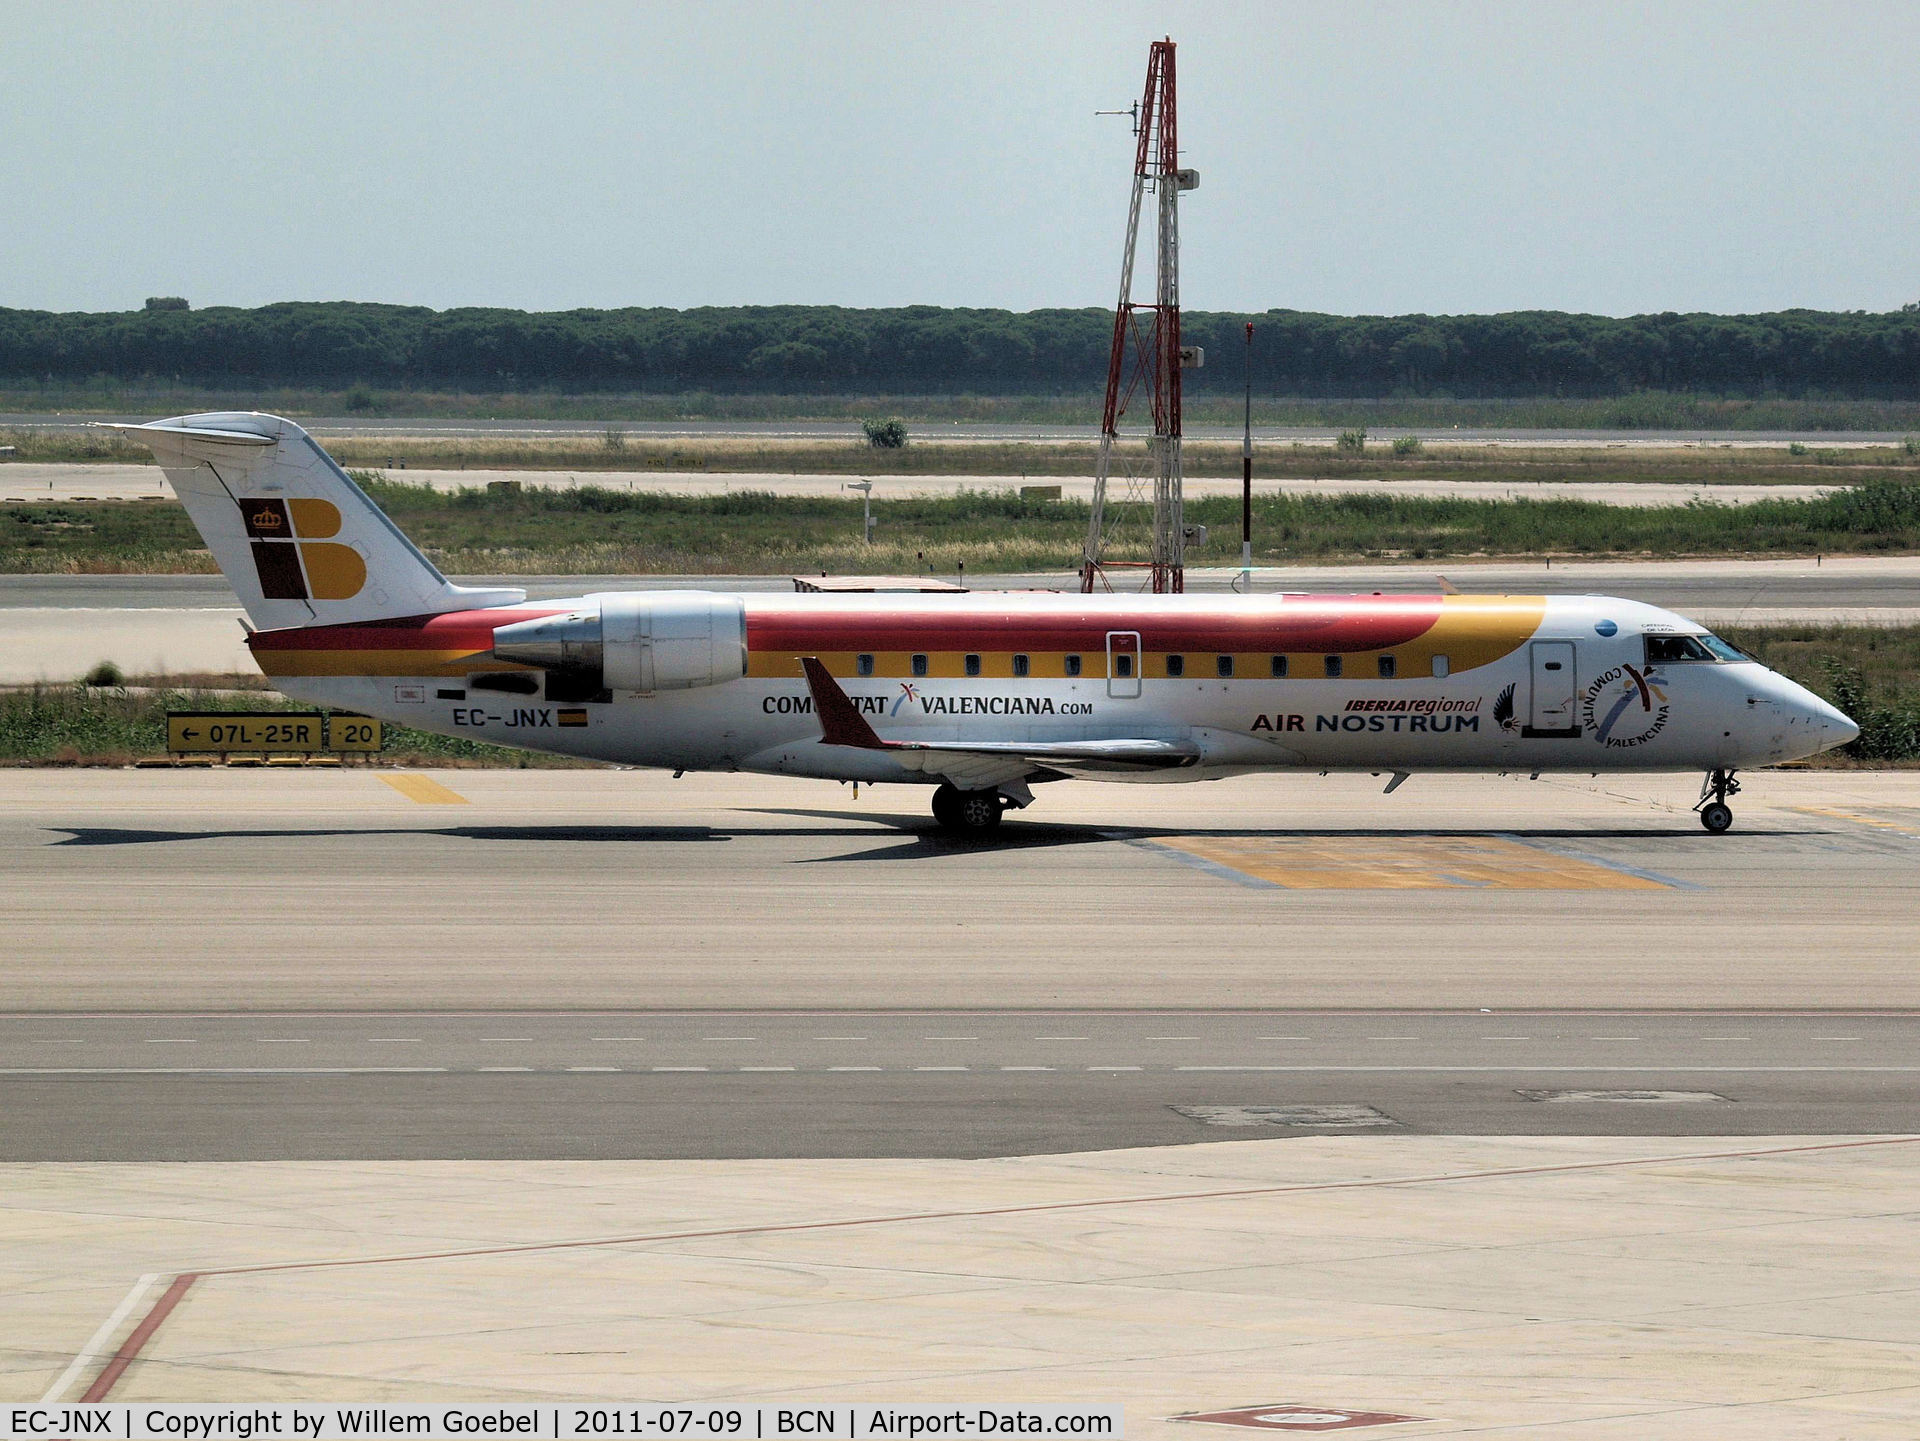 EC-JNX, 2006 Bombardier CRJ-200ER (CL-600-2B19) C/N 8058, Taxi to the gate of Barcelona Airport